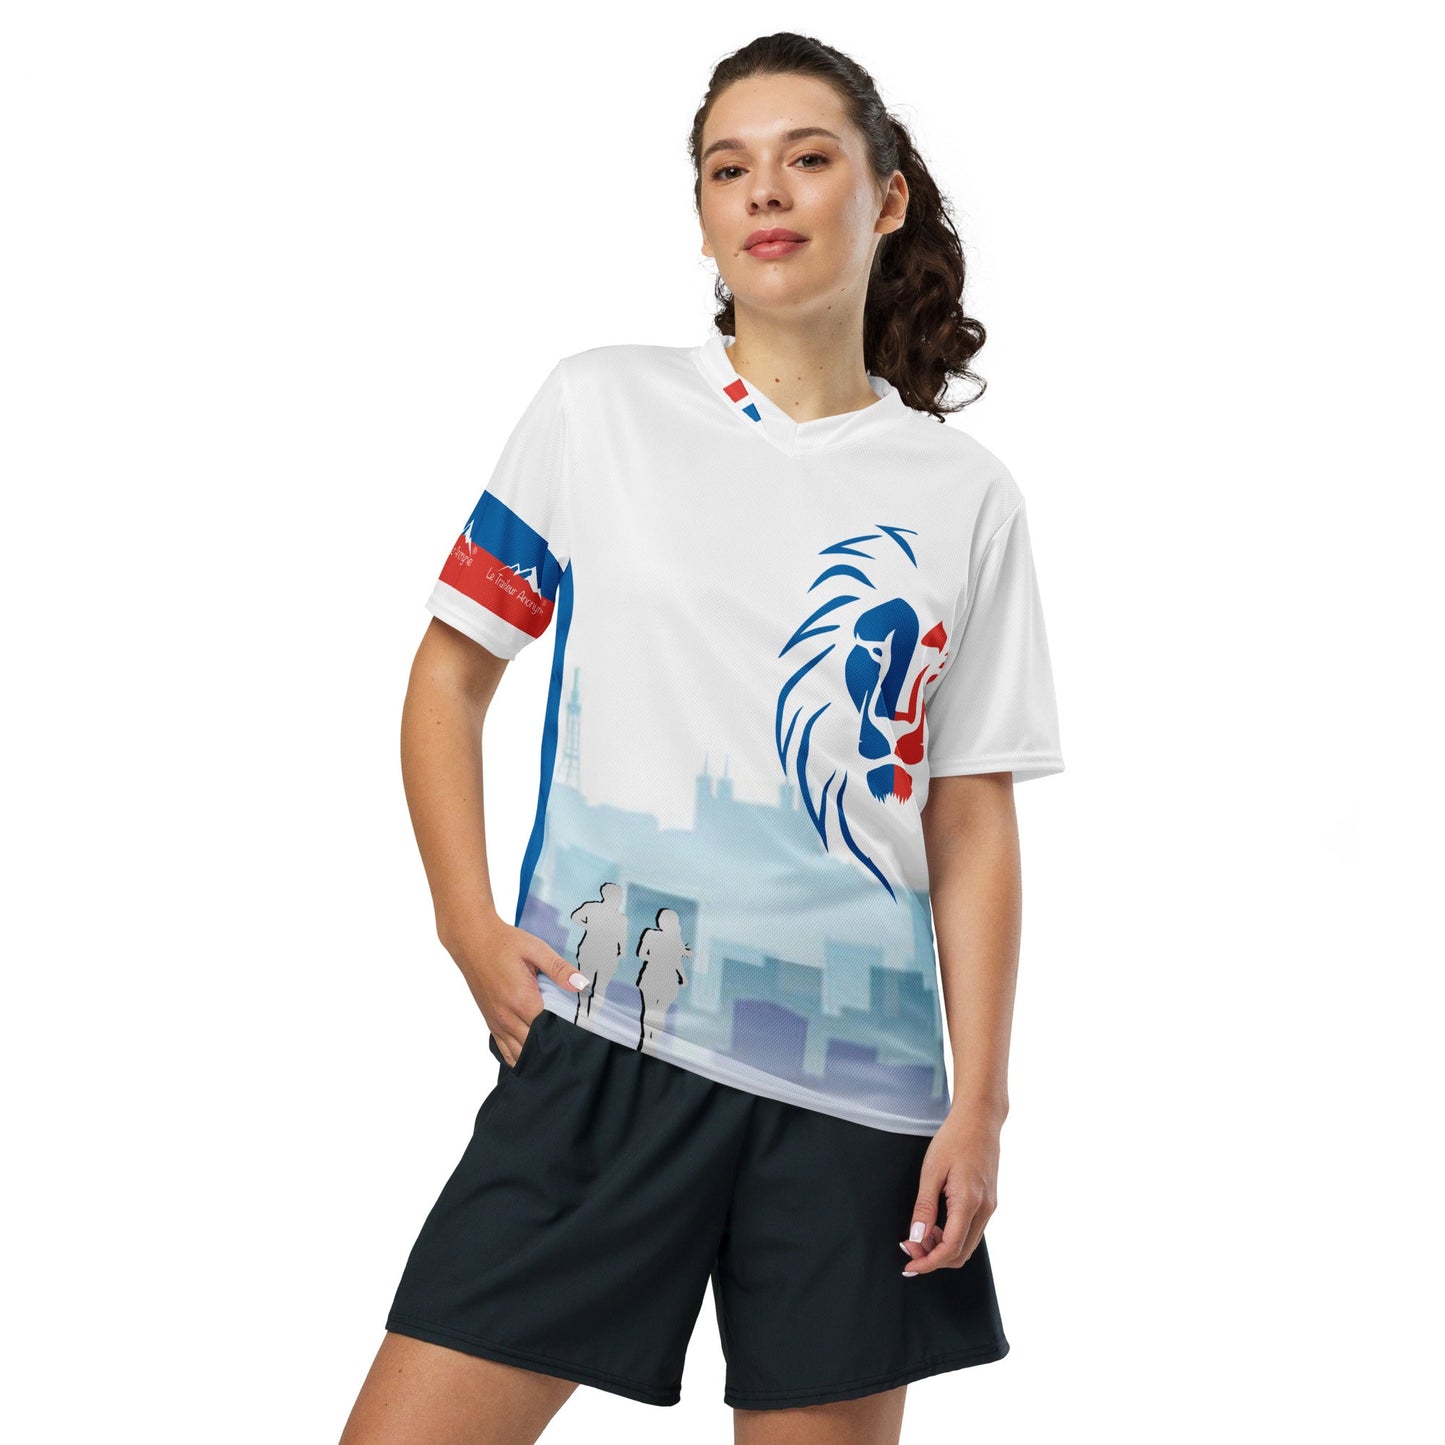 Maillot Running - Unisexe - French Cities - Lyon - Le Traileur Anonyme